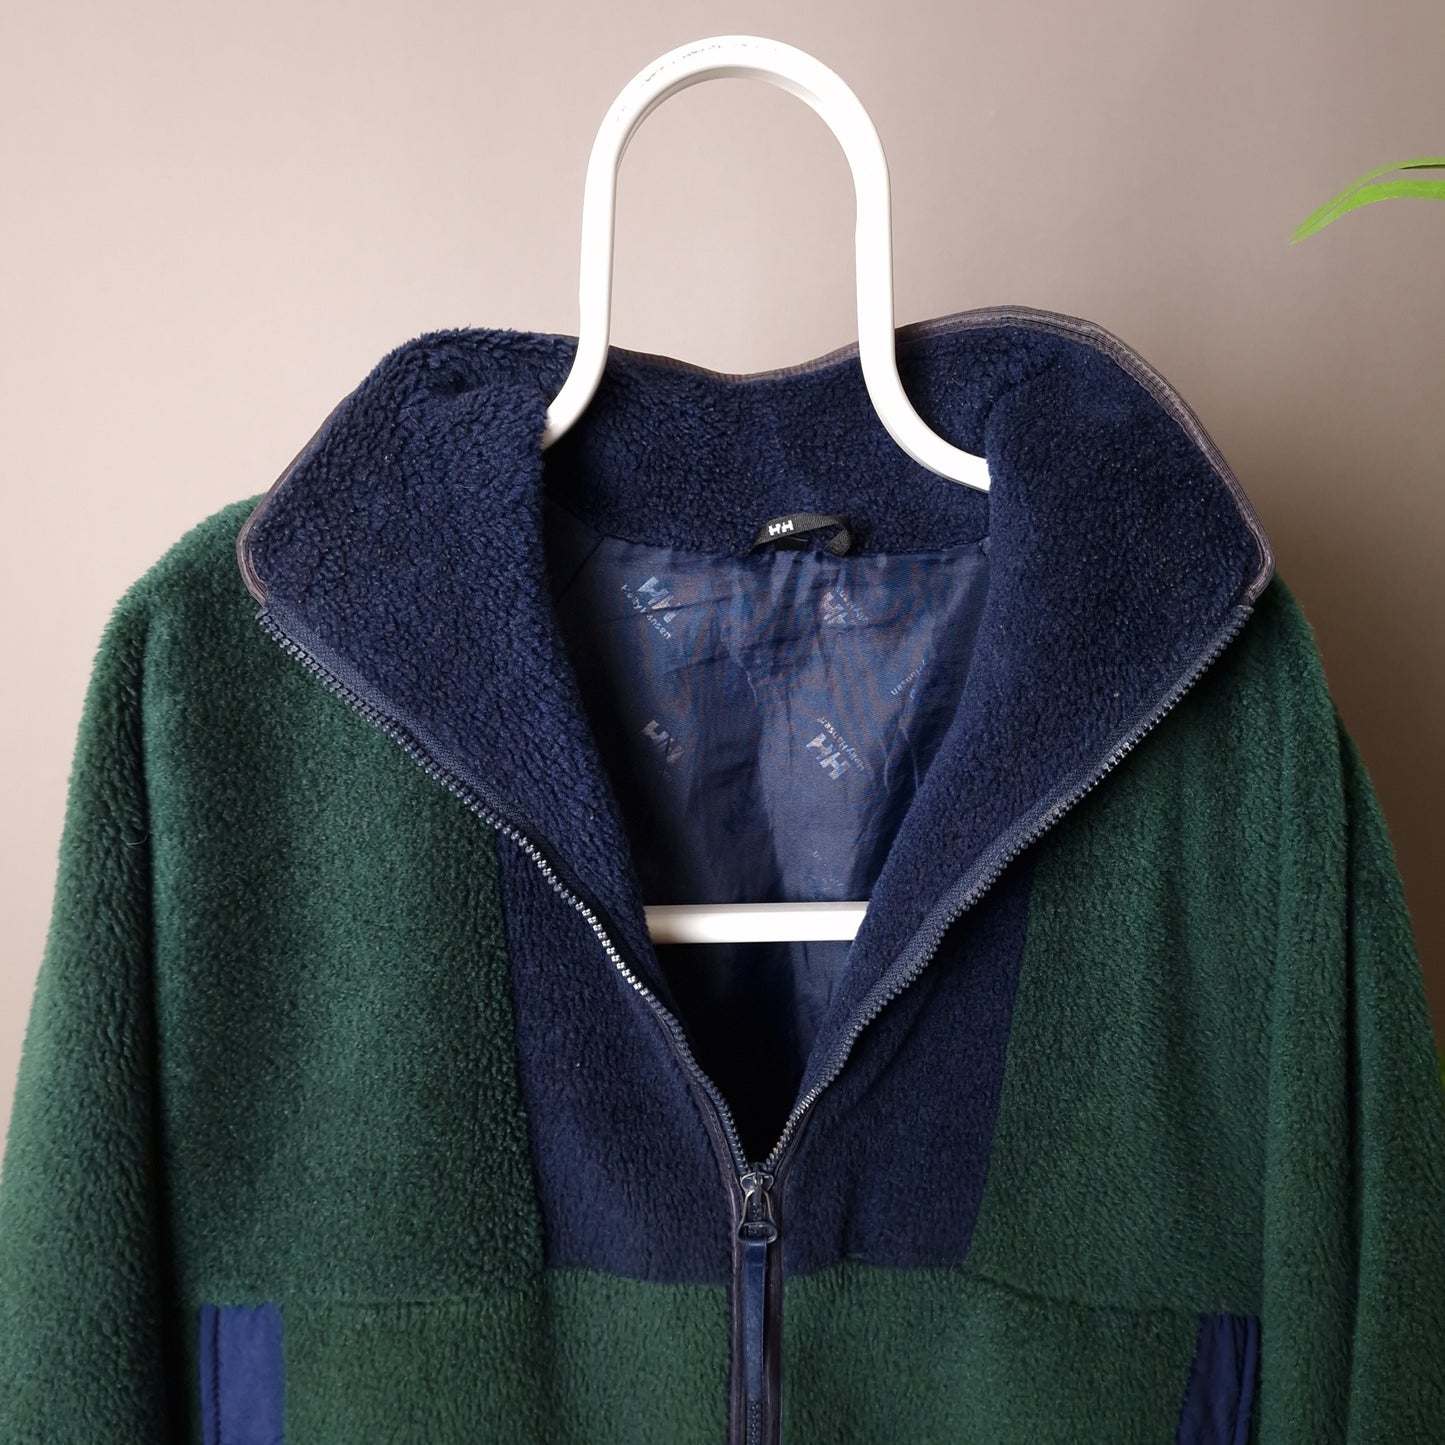 Vintage Helly Hansen fleece in green and blue - small